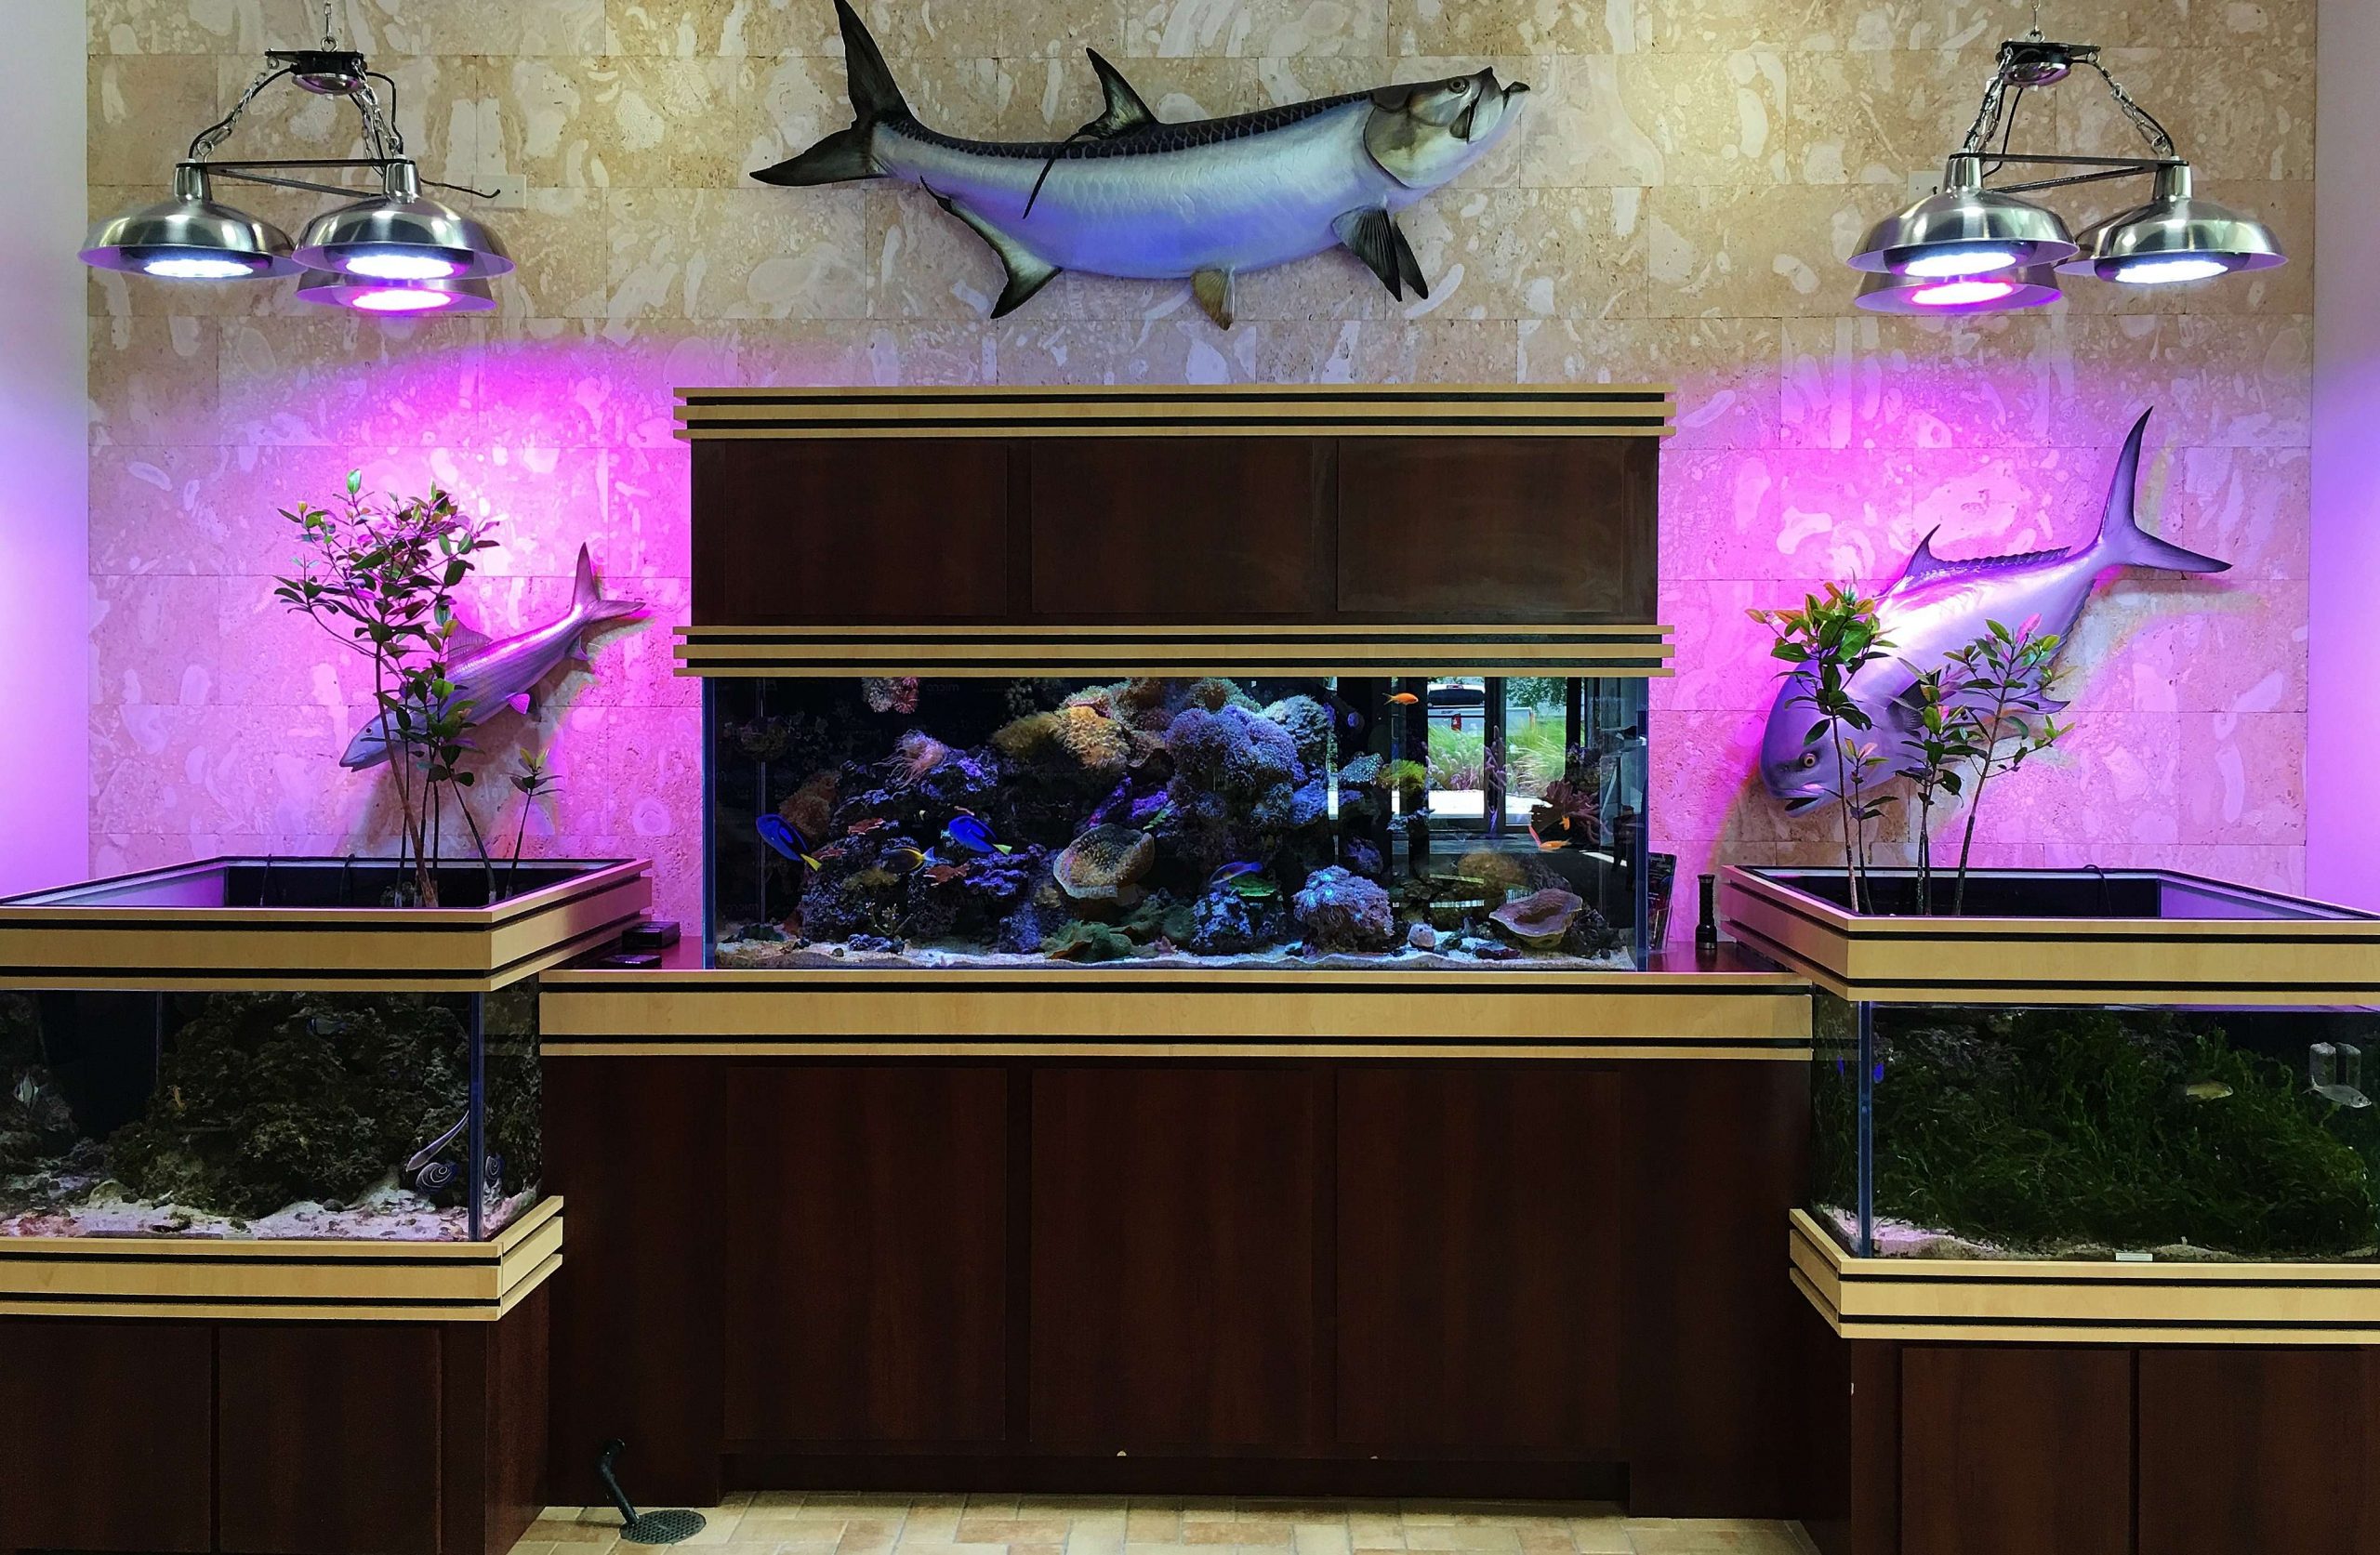 This huge saltwater fish tank display is set up in the facilityâs main lobby. For a more natural effect, Oliverio added live mangroves beneath grow lights â further connecting the brand to its saltwater roots.